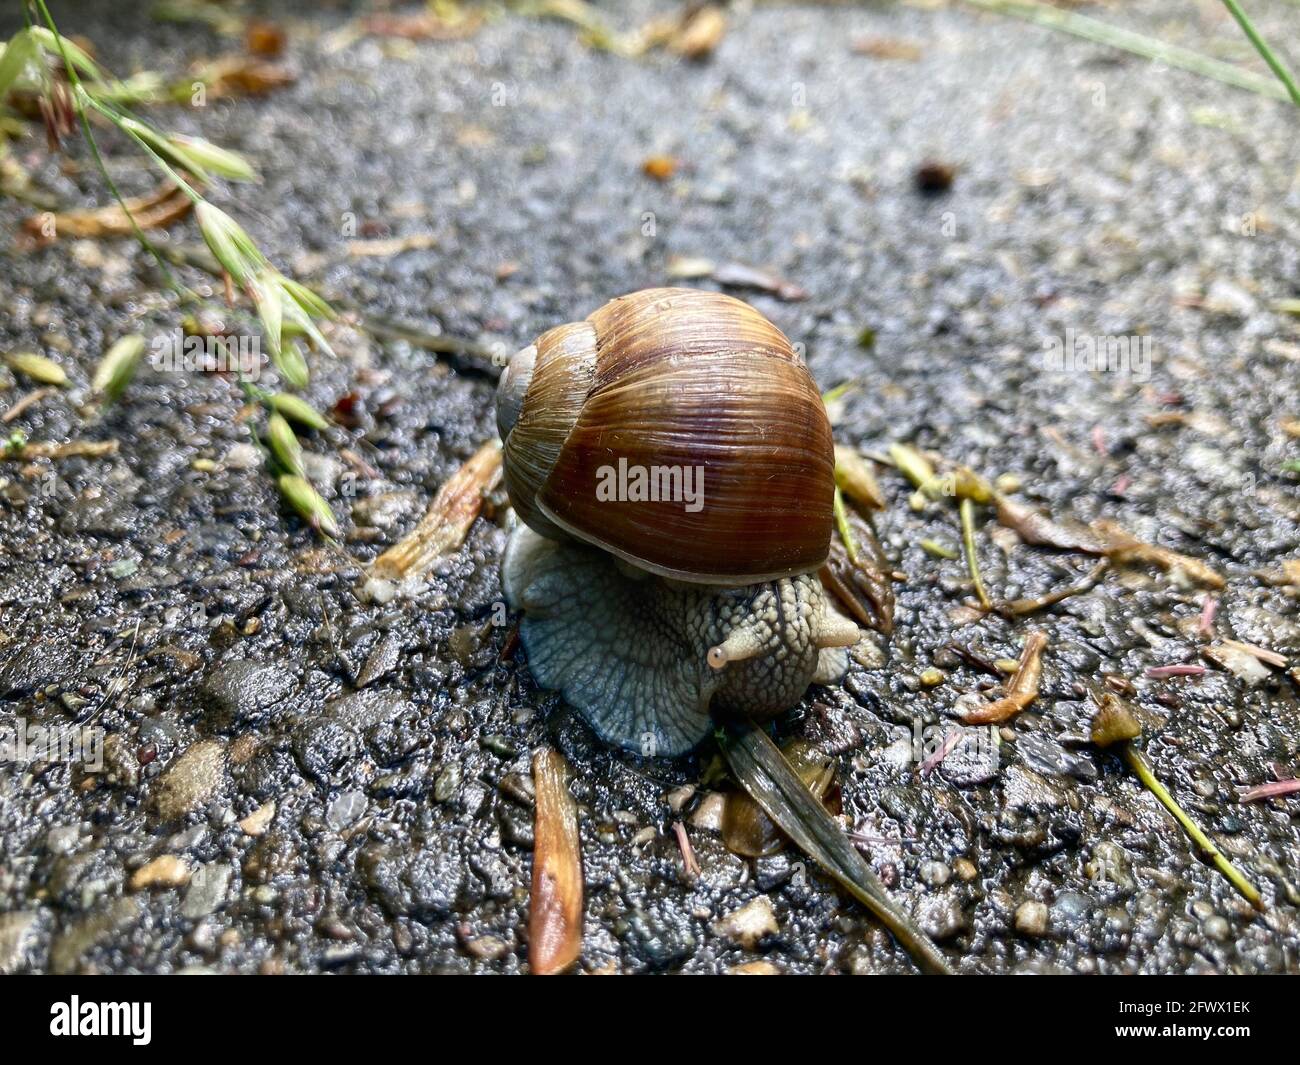 Close up of a Helix Pomatia snail crawling on a street in Switzerland Stock Photo